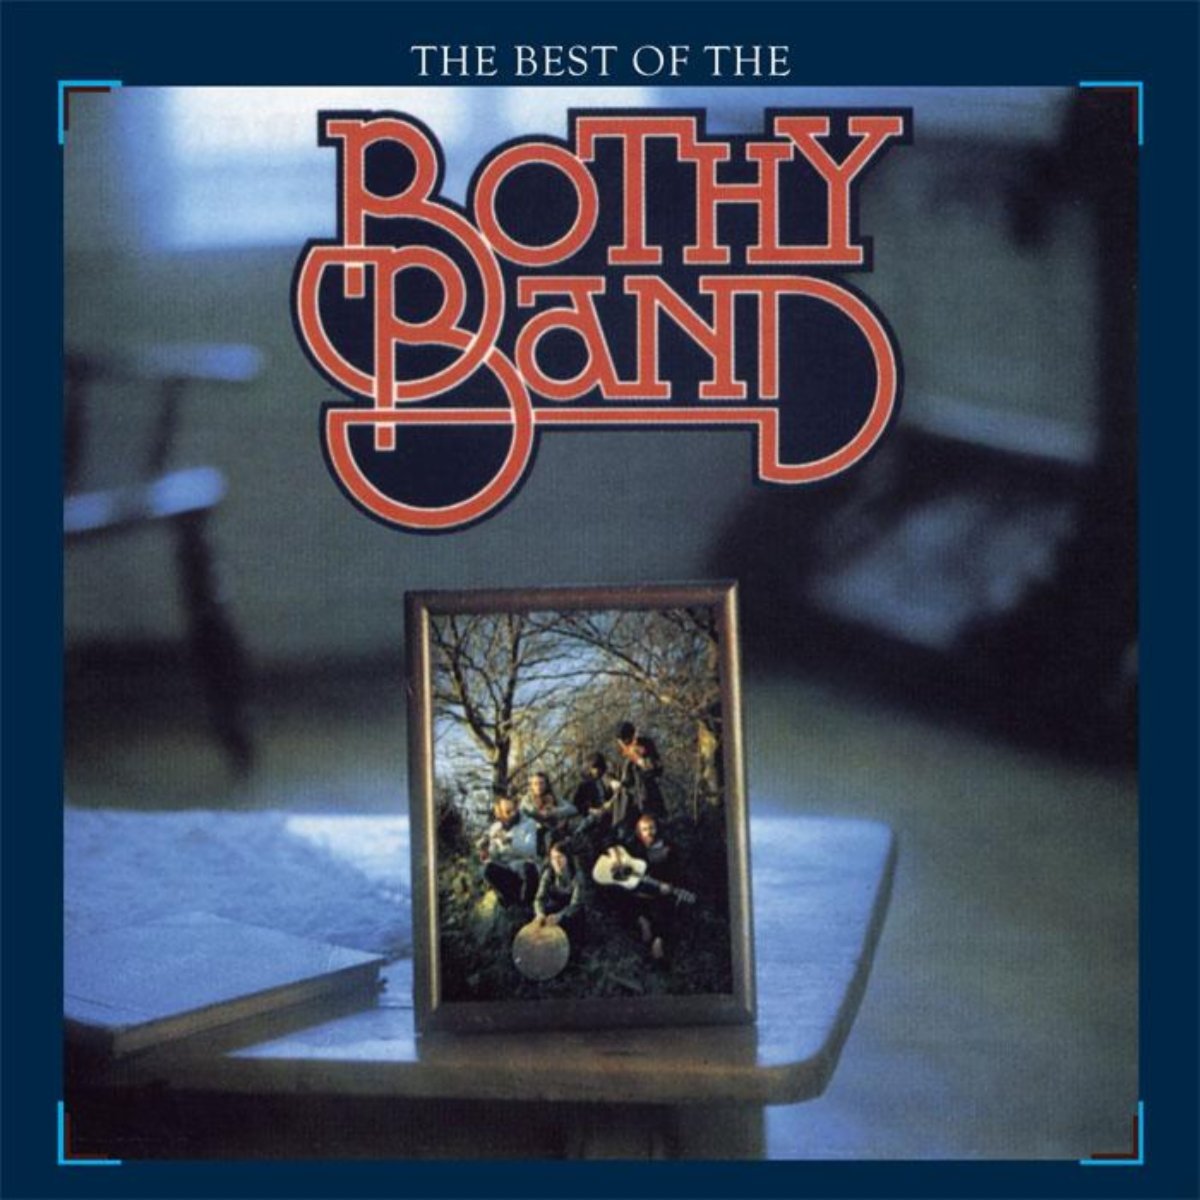 The Bothy Band-The Best Of The Bothy Band-CD-FLAC-1988-FLACME Download